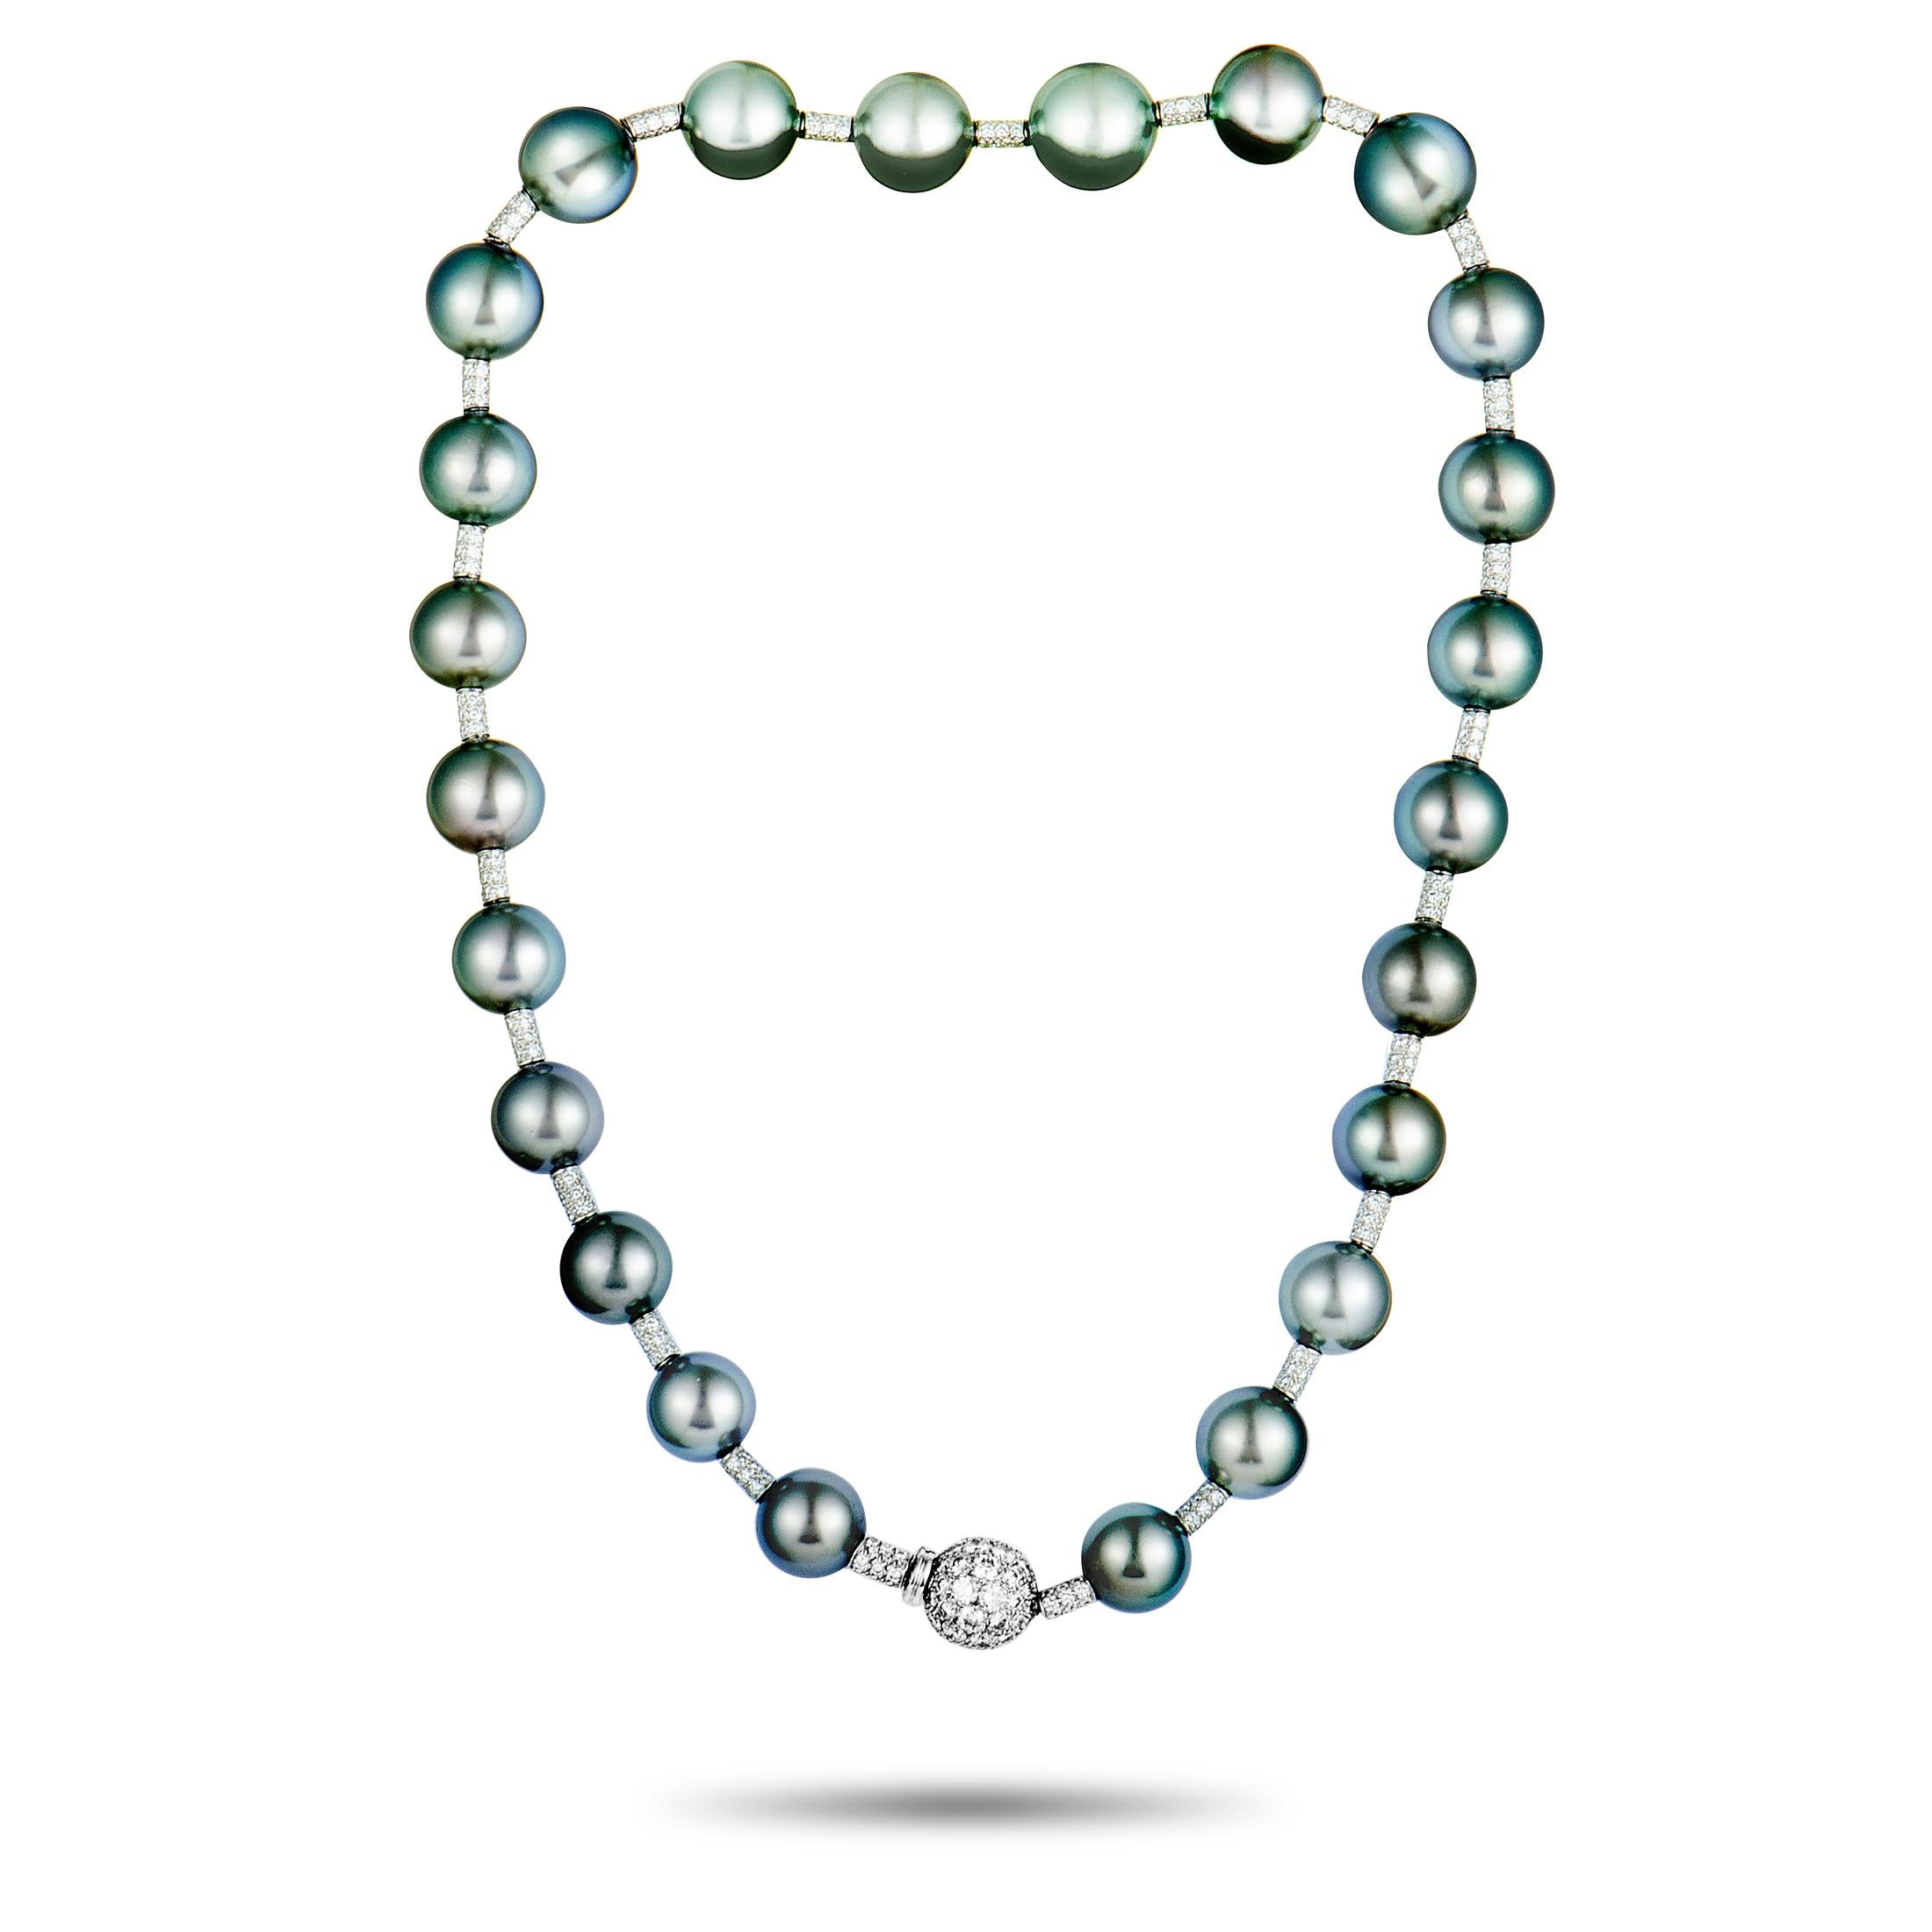 A design by Chanel, this extraordinary necklace is made of elegant 18K white gold and boasts a plethora of enticing black pearls and scintillating diamonds. The diamonds weigh in total approximately 6.00 carats and the pearls measure from 10.5 to